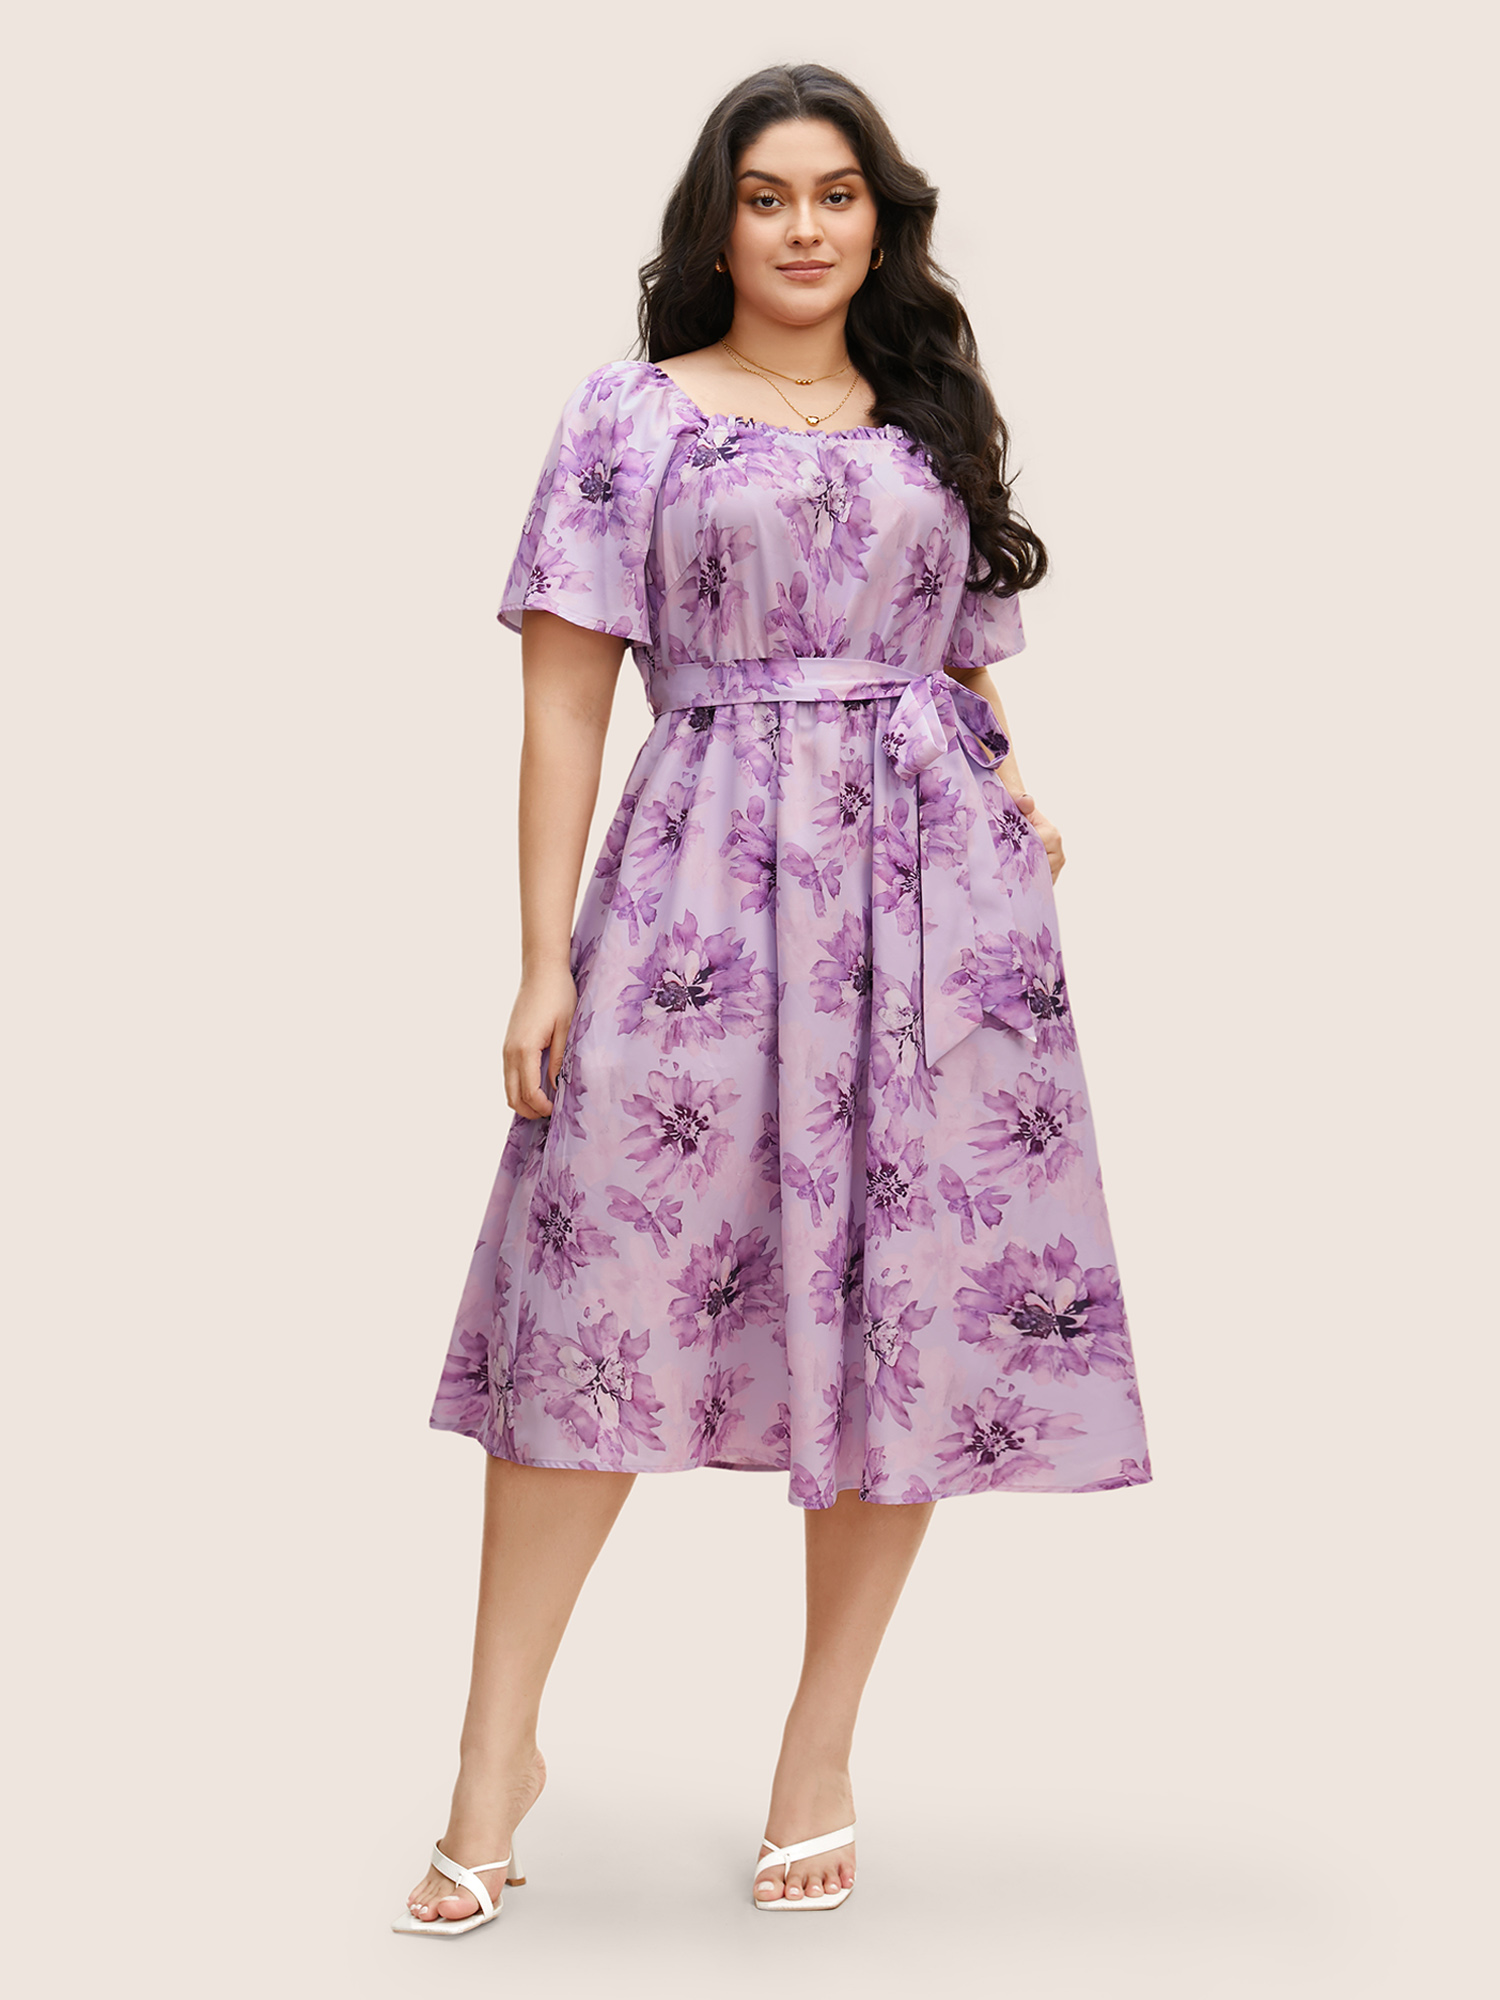 

Plus Size Floral Print Square Neck Frill Trim Midi Dress Lavender Women Frill Trim Square Neck Short sleeve Curvy BloomChic